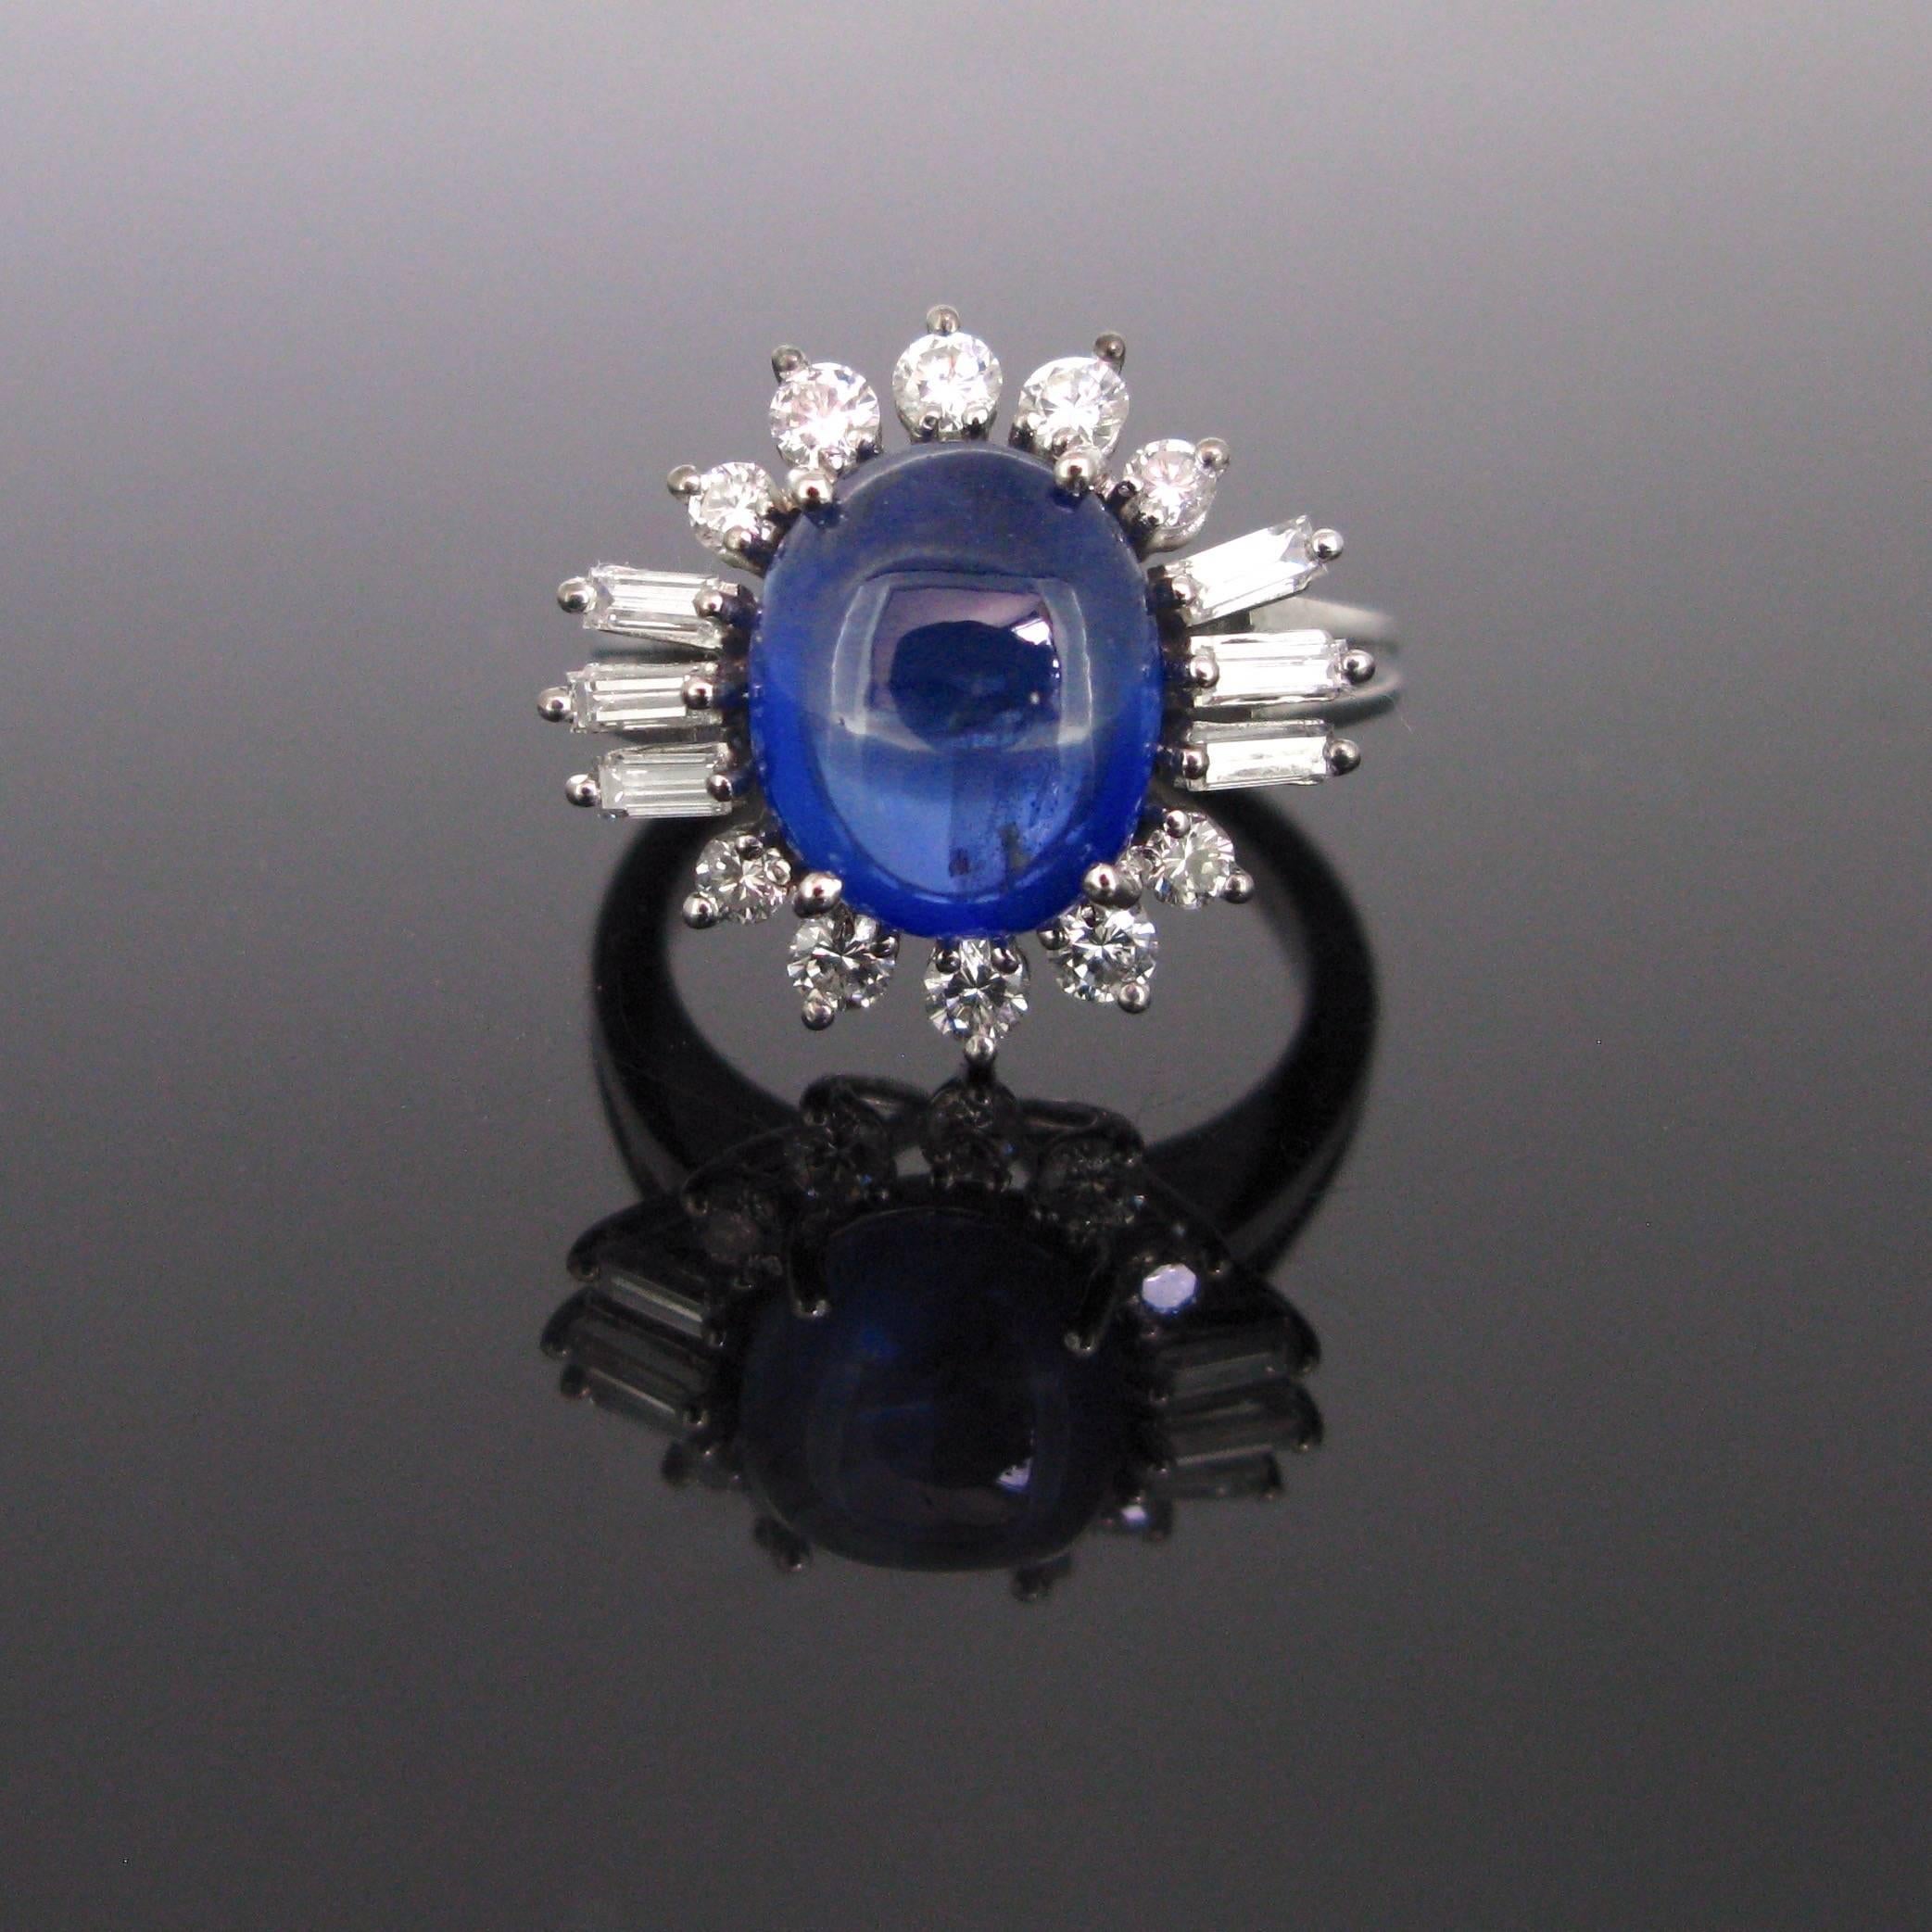 This beautiful ring is made in 18k white gold and features a cabochon cut Ceylan sapphire with an approximate weight of 6.20ct and no indication of heating. It comes with a GCS certificate. It is surrounded by 16 diamonds – 10 round brilliant cut